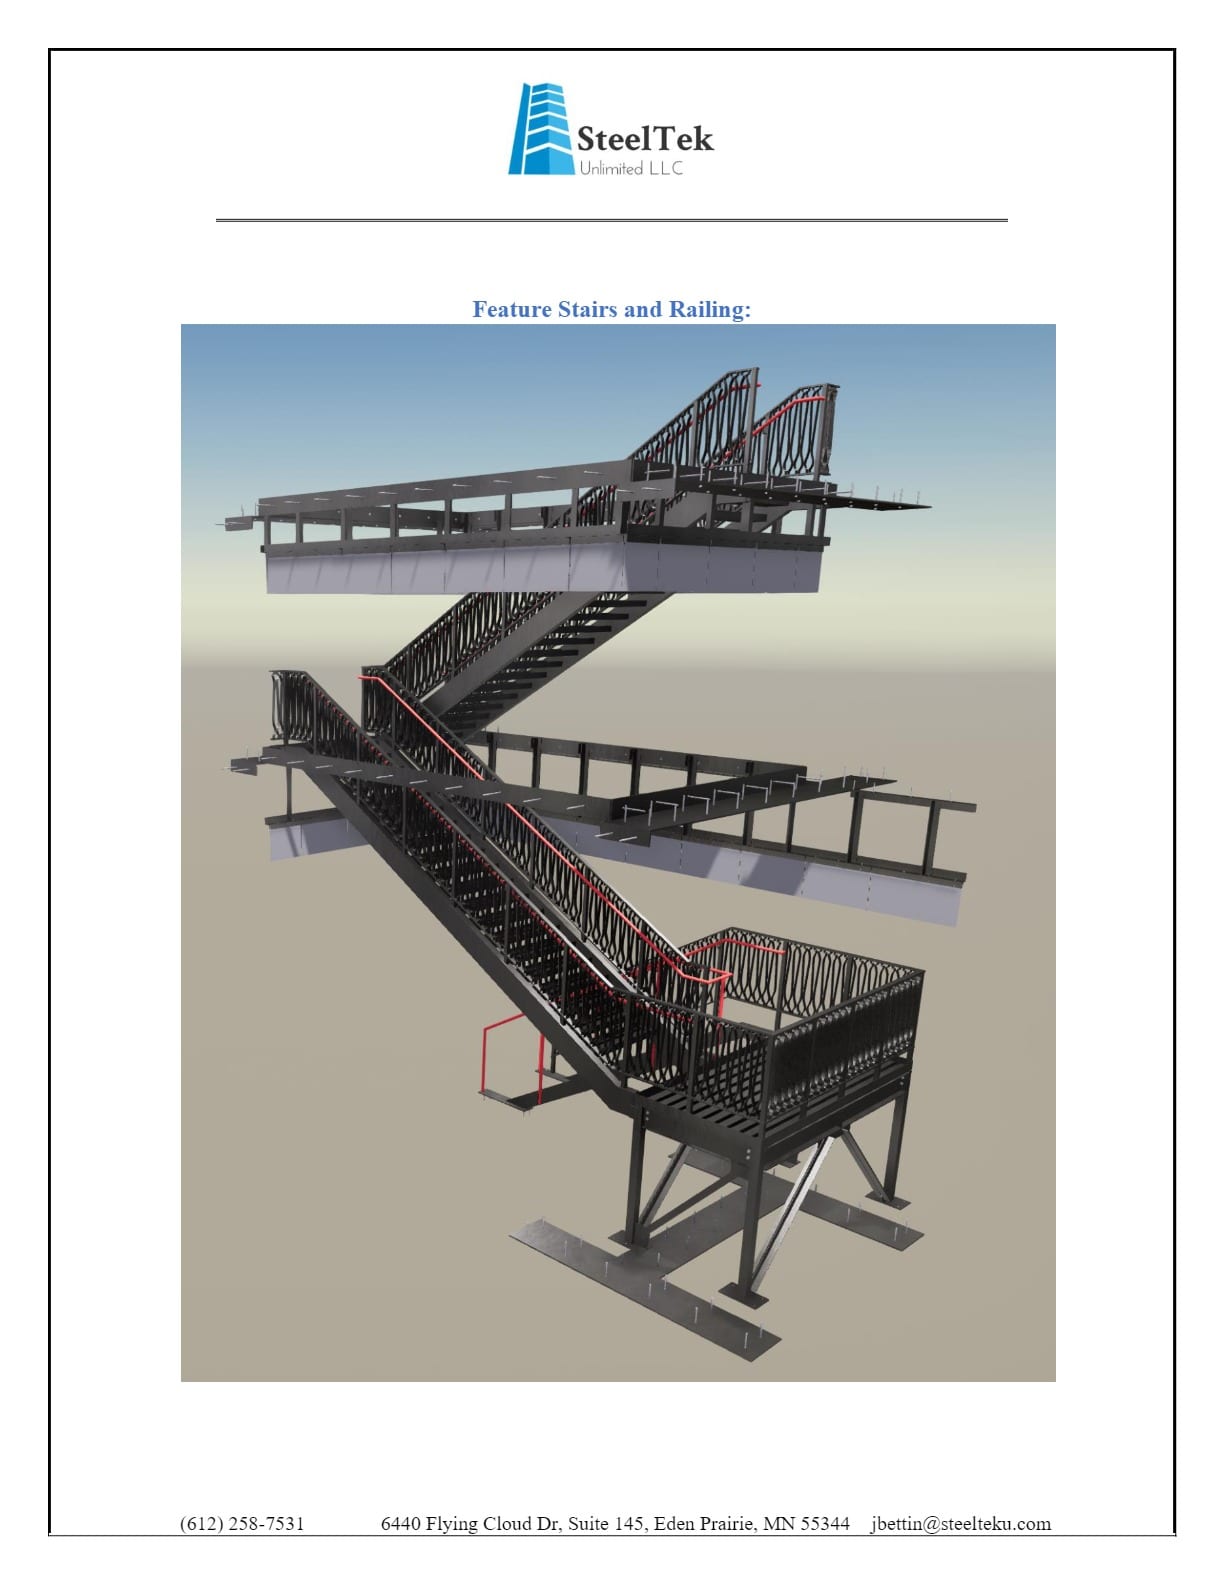 Steel Tek Unlimited 2021 AISC Brochure — Feature Stairs and Railings